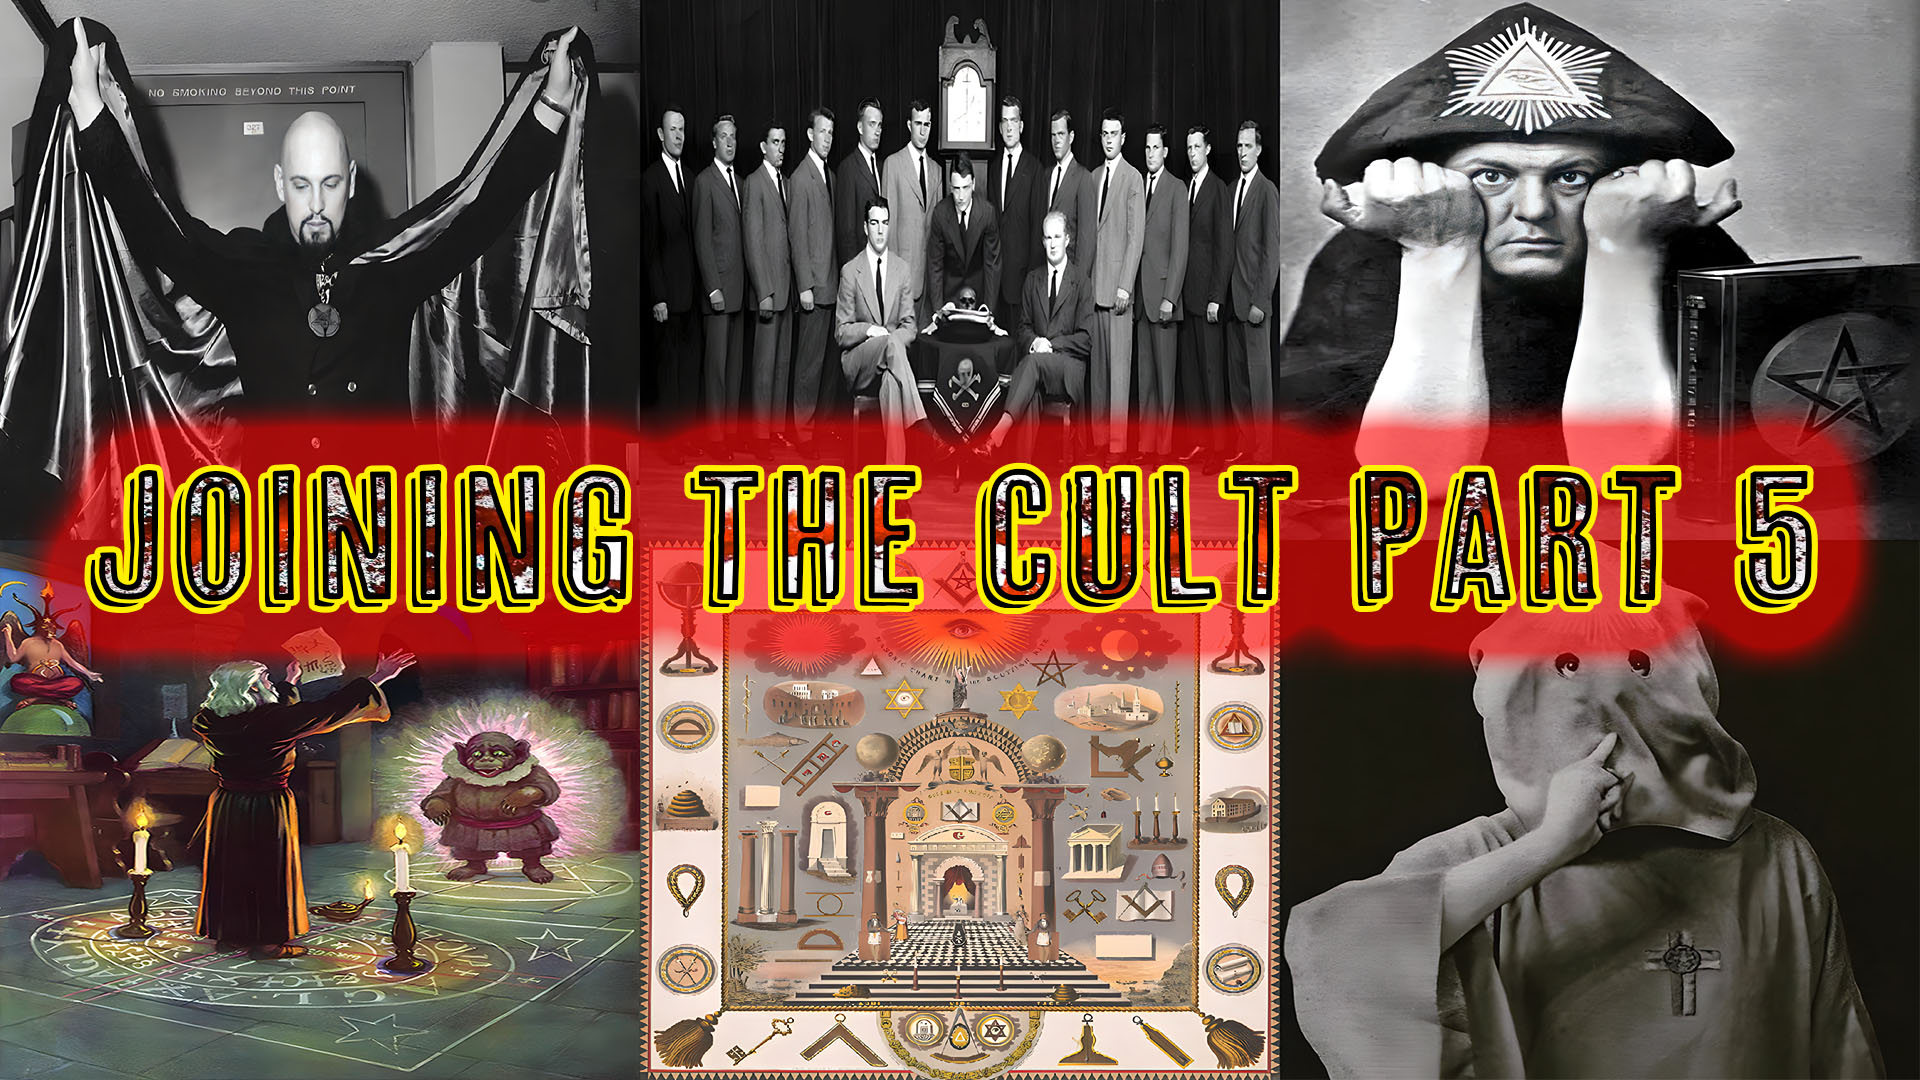 Joining The Cult Part 5 occult freemason satanists aleister crowley anton lavey john dee summoning a demon with skull and bones all represented in The Popular Cult